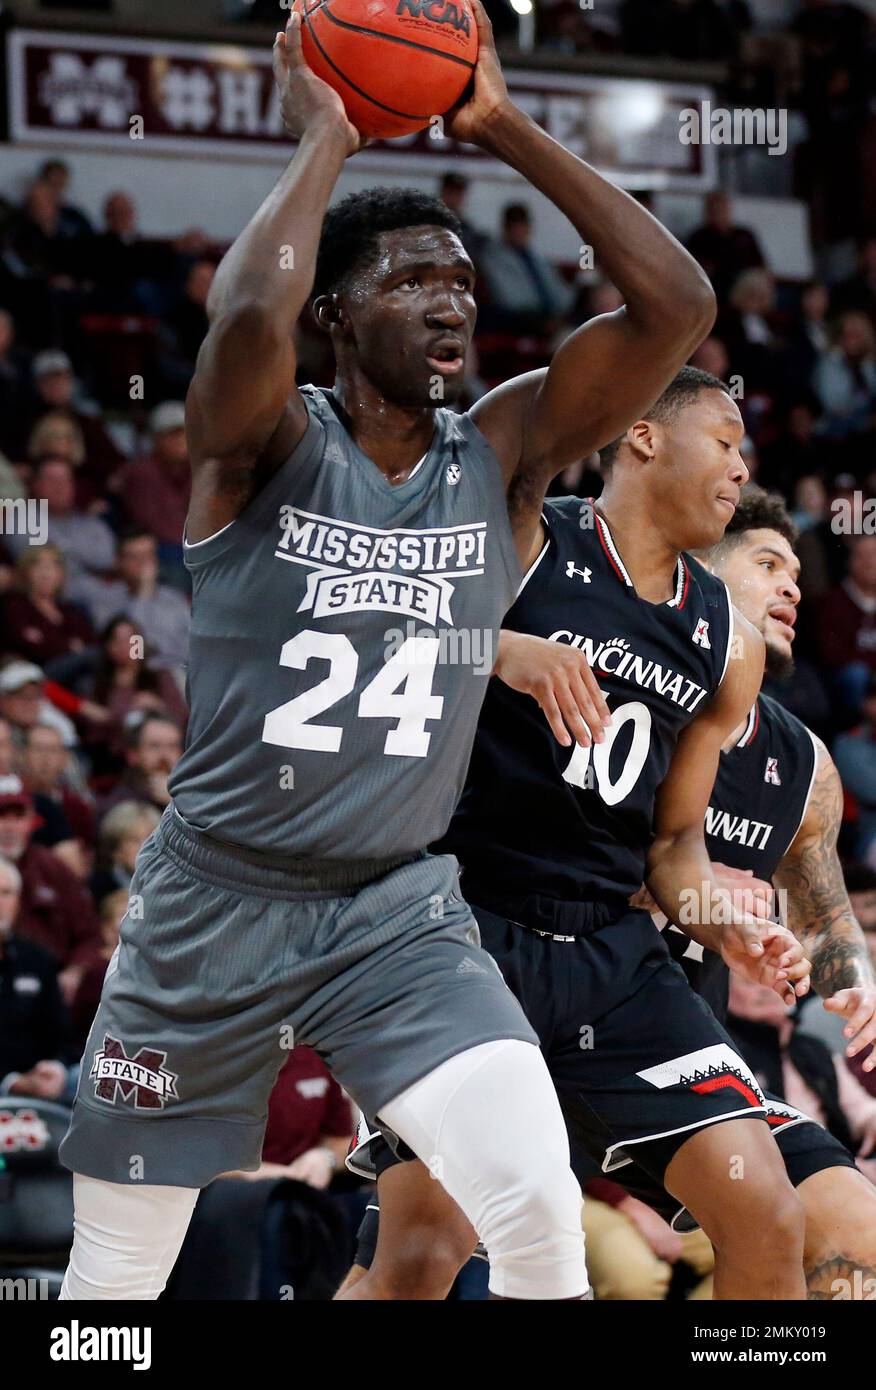 Mississippi State forward Abdul Ado (24) prepares to pass the ball  downcourt against Cincinnati during the second half of an NCAA college  basketball game in Starkville, Miss., Saturday, Dec.15, 2018. (AP  Photo/Rogelio